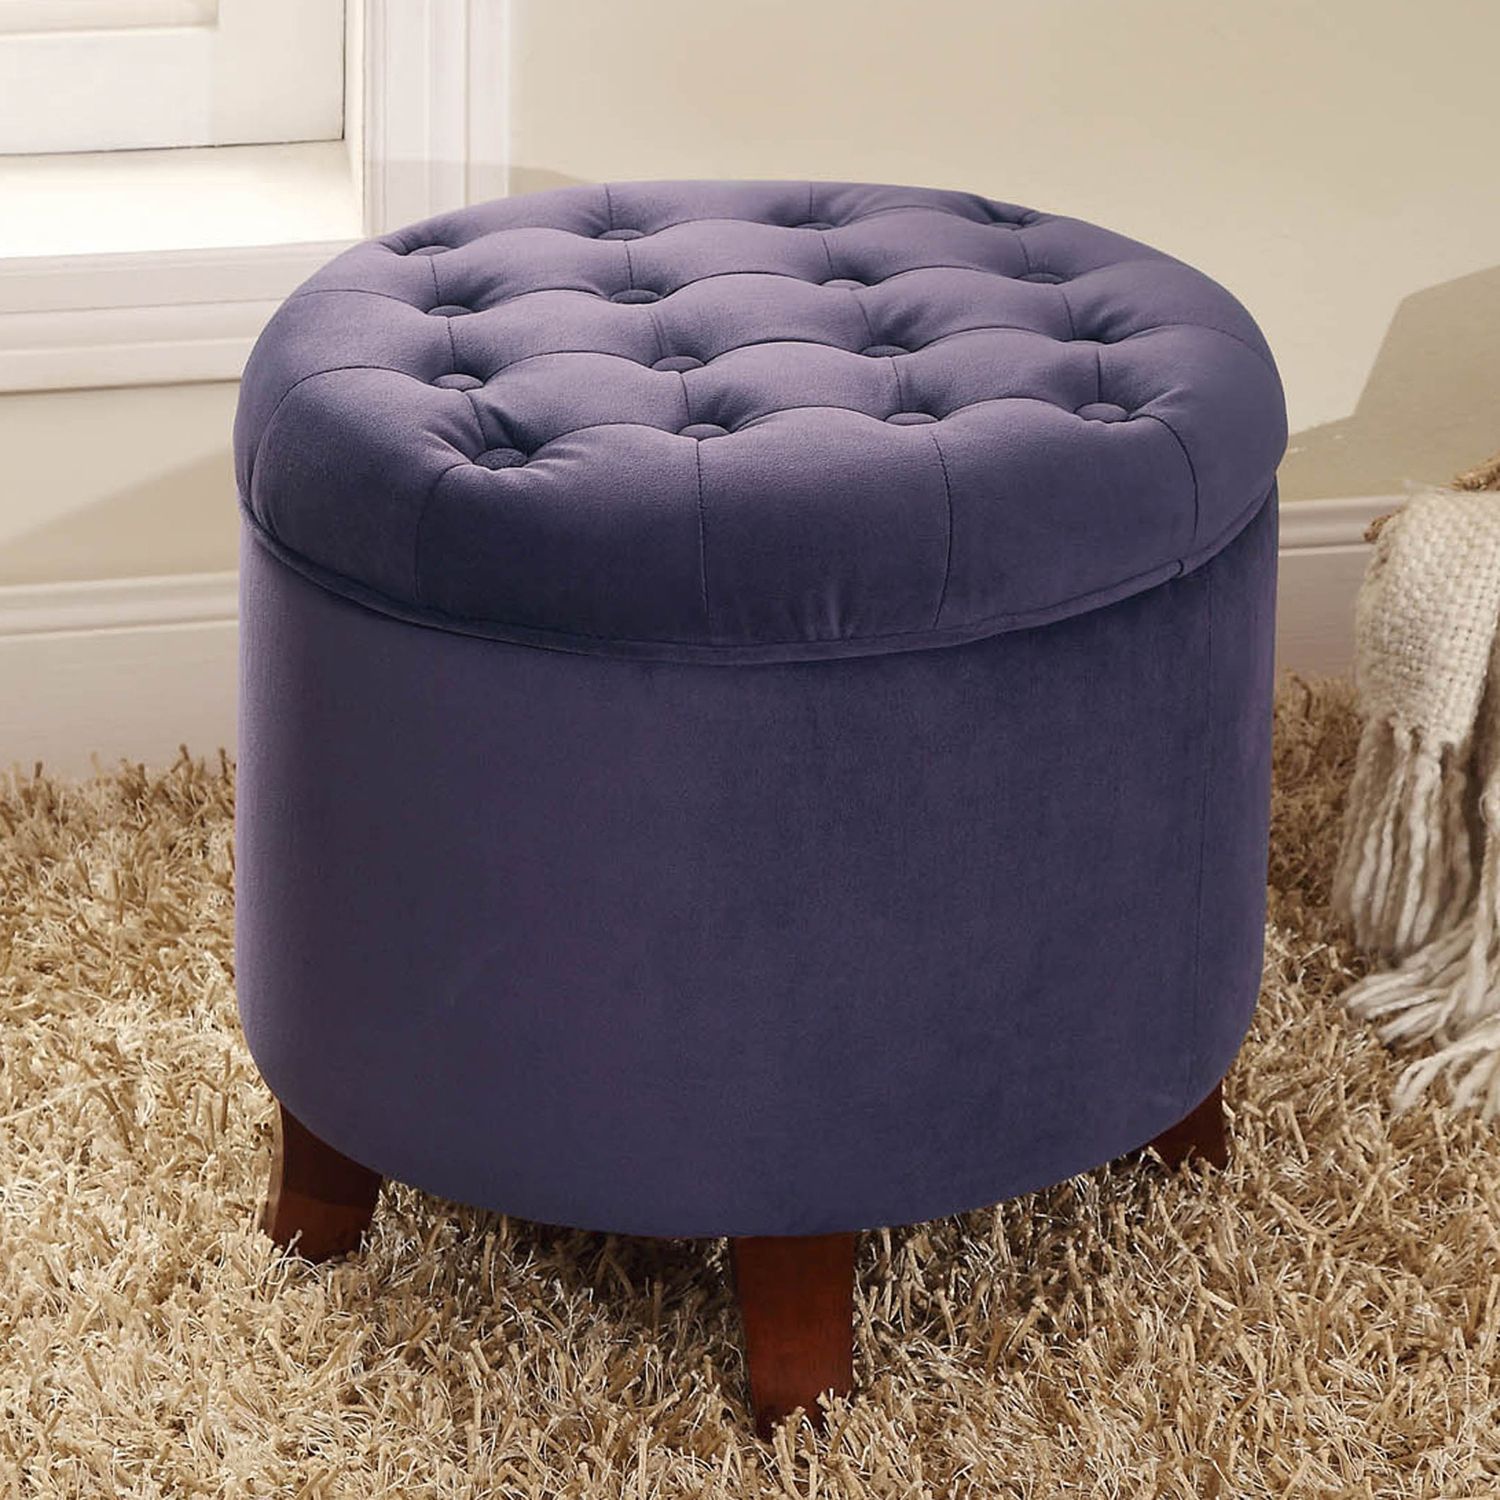 Famous Purple Velvet Tufted Round Storage Ottoman – Pier1 Imports Intended For White Large Round Ottomans (View 1 of 10)